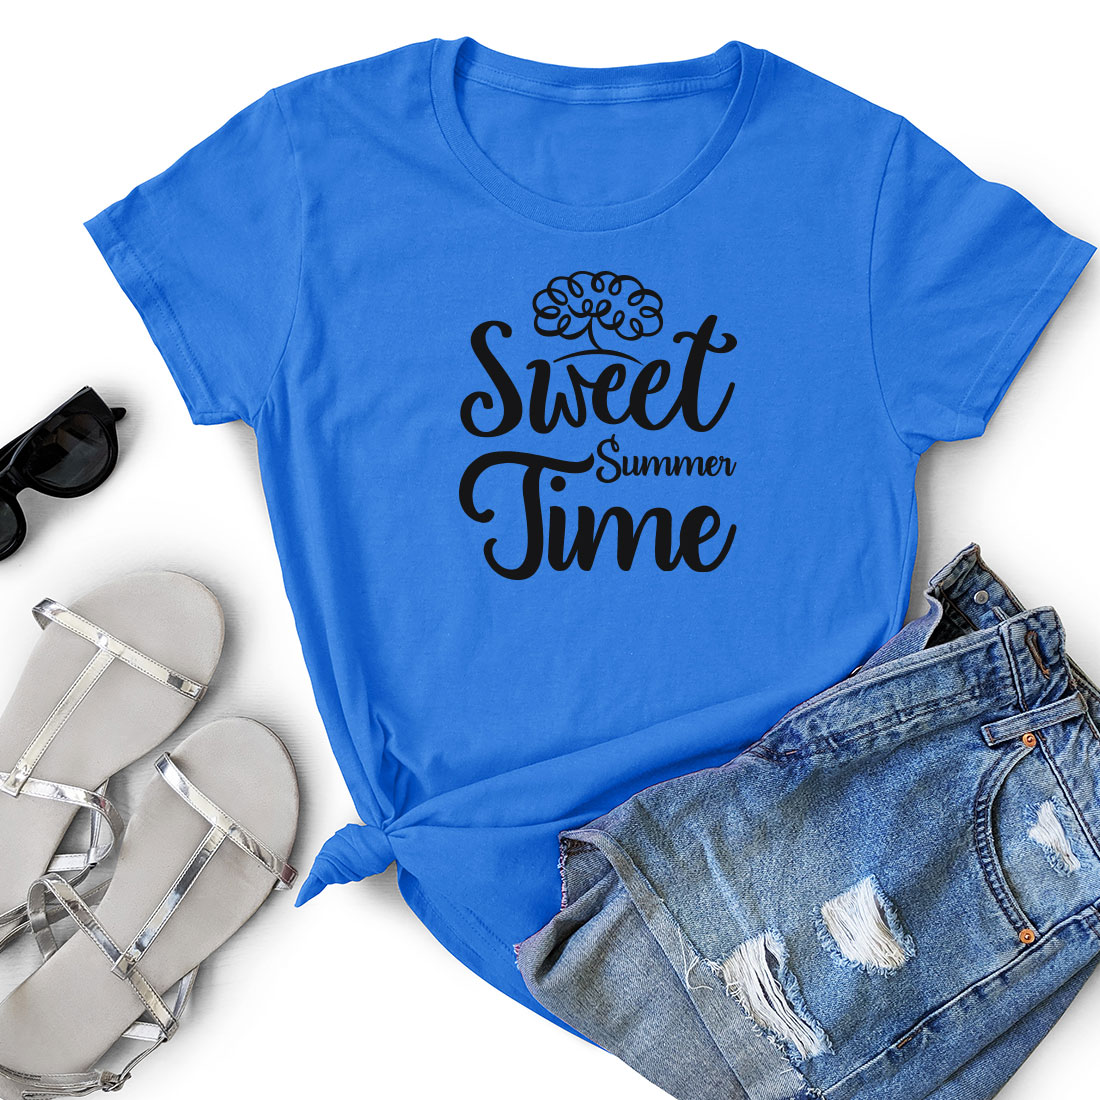 T - shirt that says sweet summer time next to a pair of shorts.